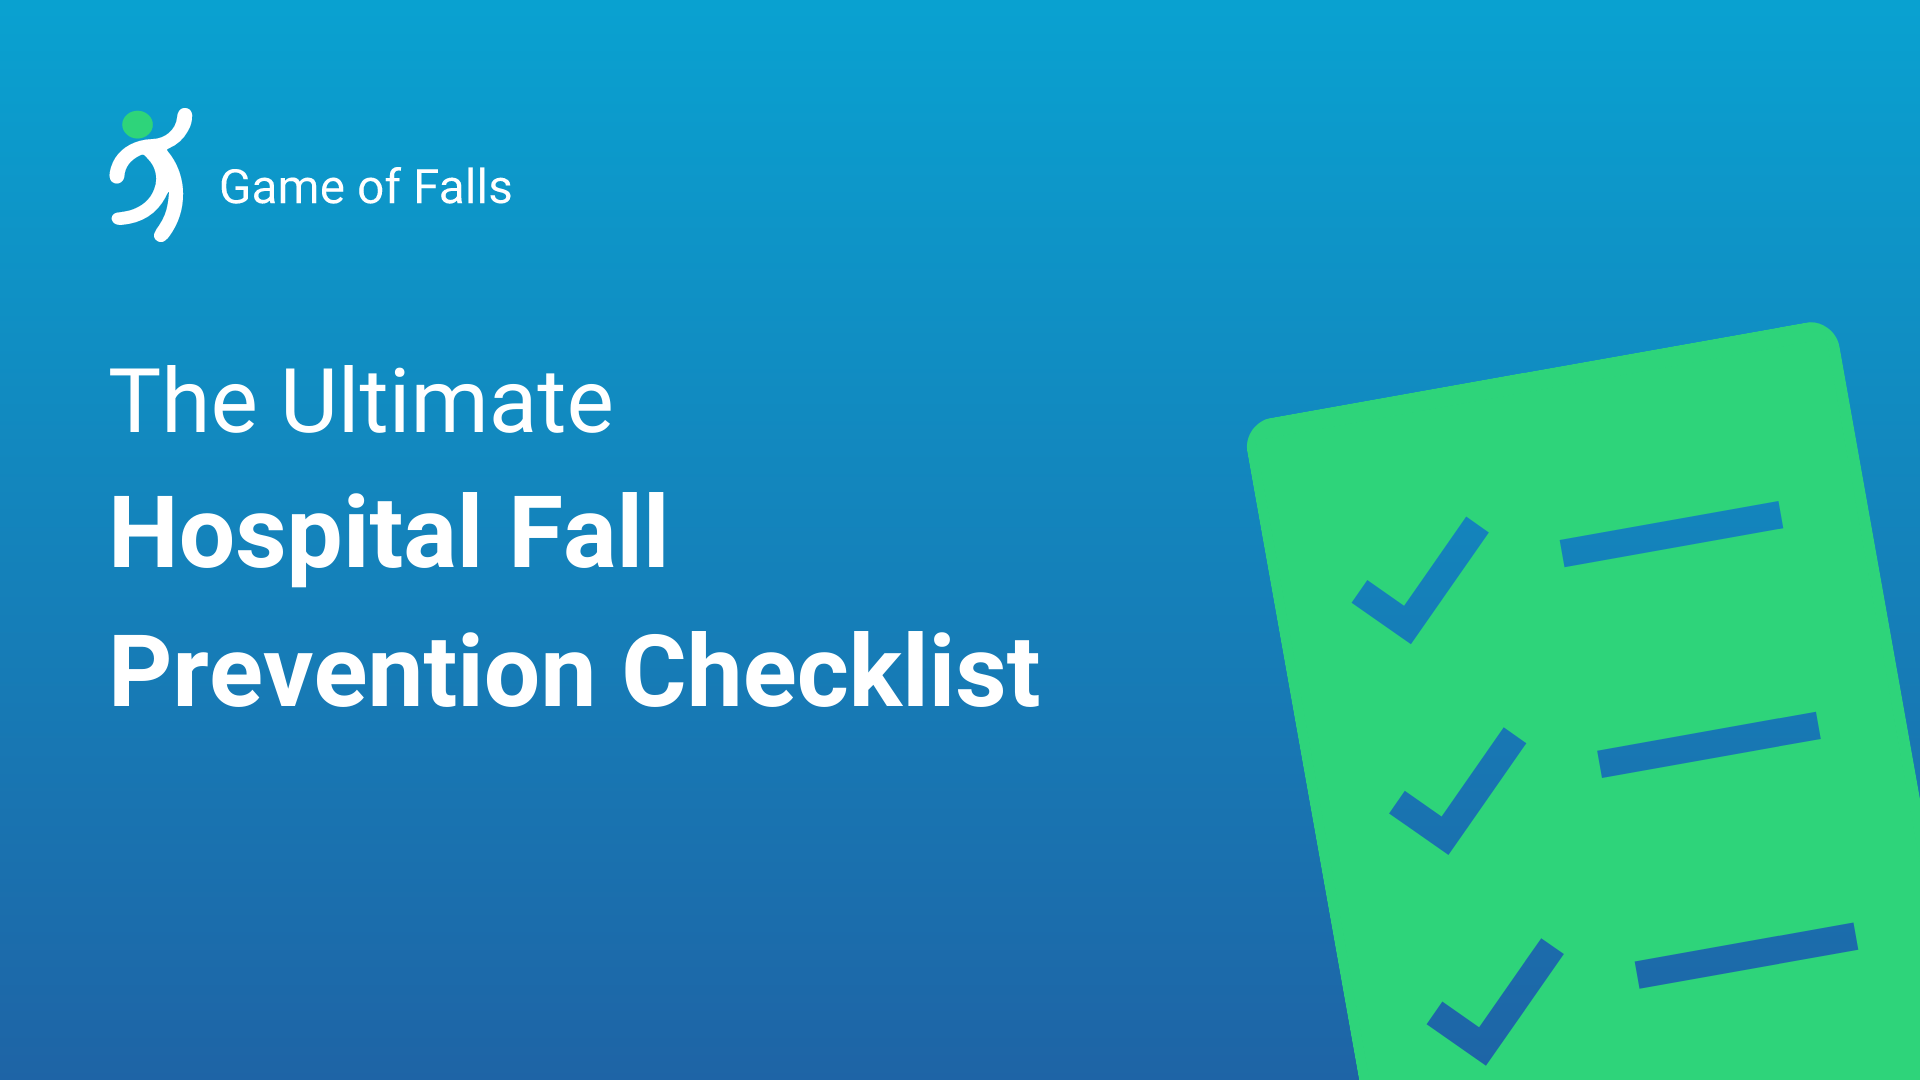 The Ultimate Hospital Fall Prevention Checklist